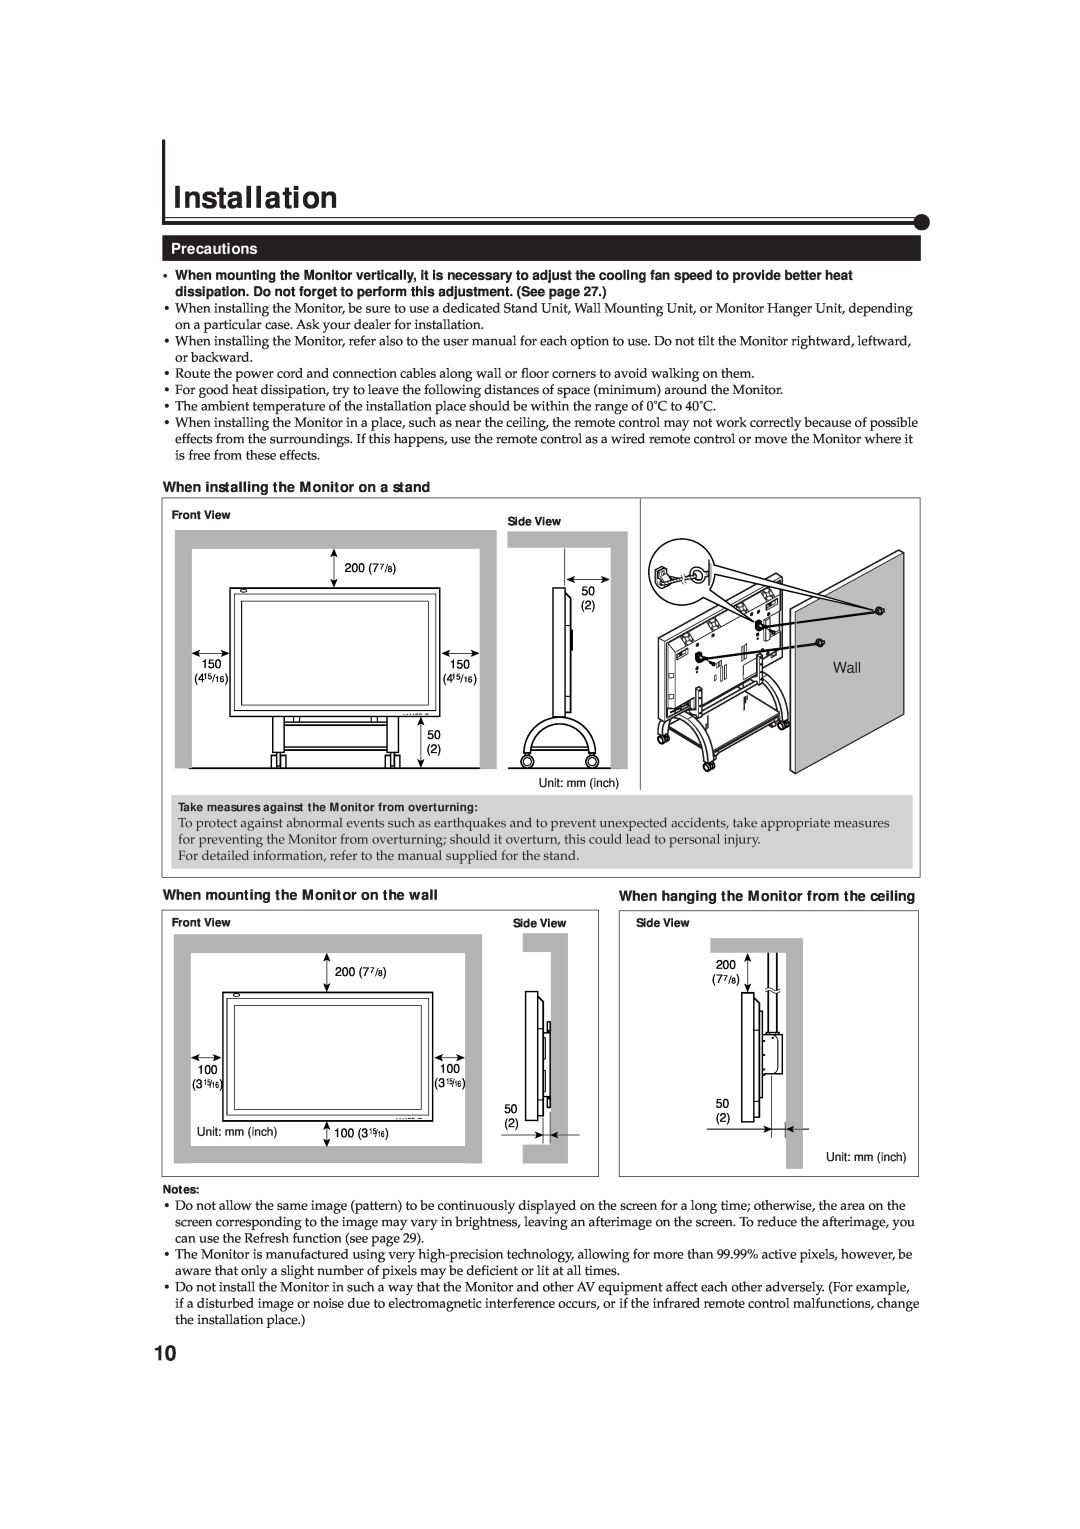 JVC GD-V4211PCE Installation, Precautions, When installing the Monitor on a stand, When mounting the Monitor on the wall 